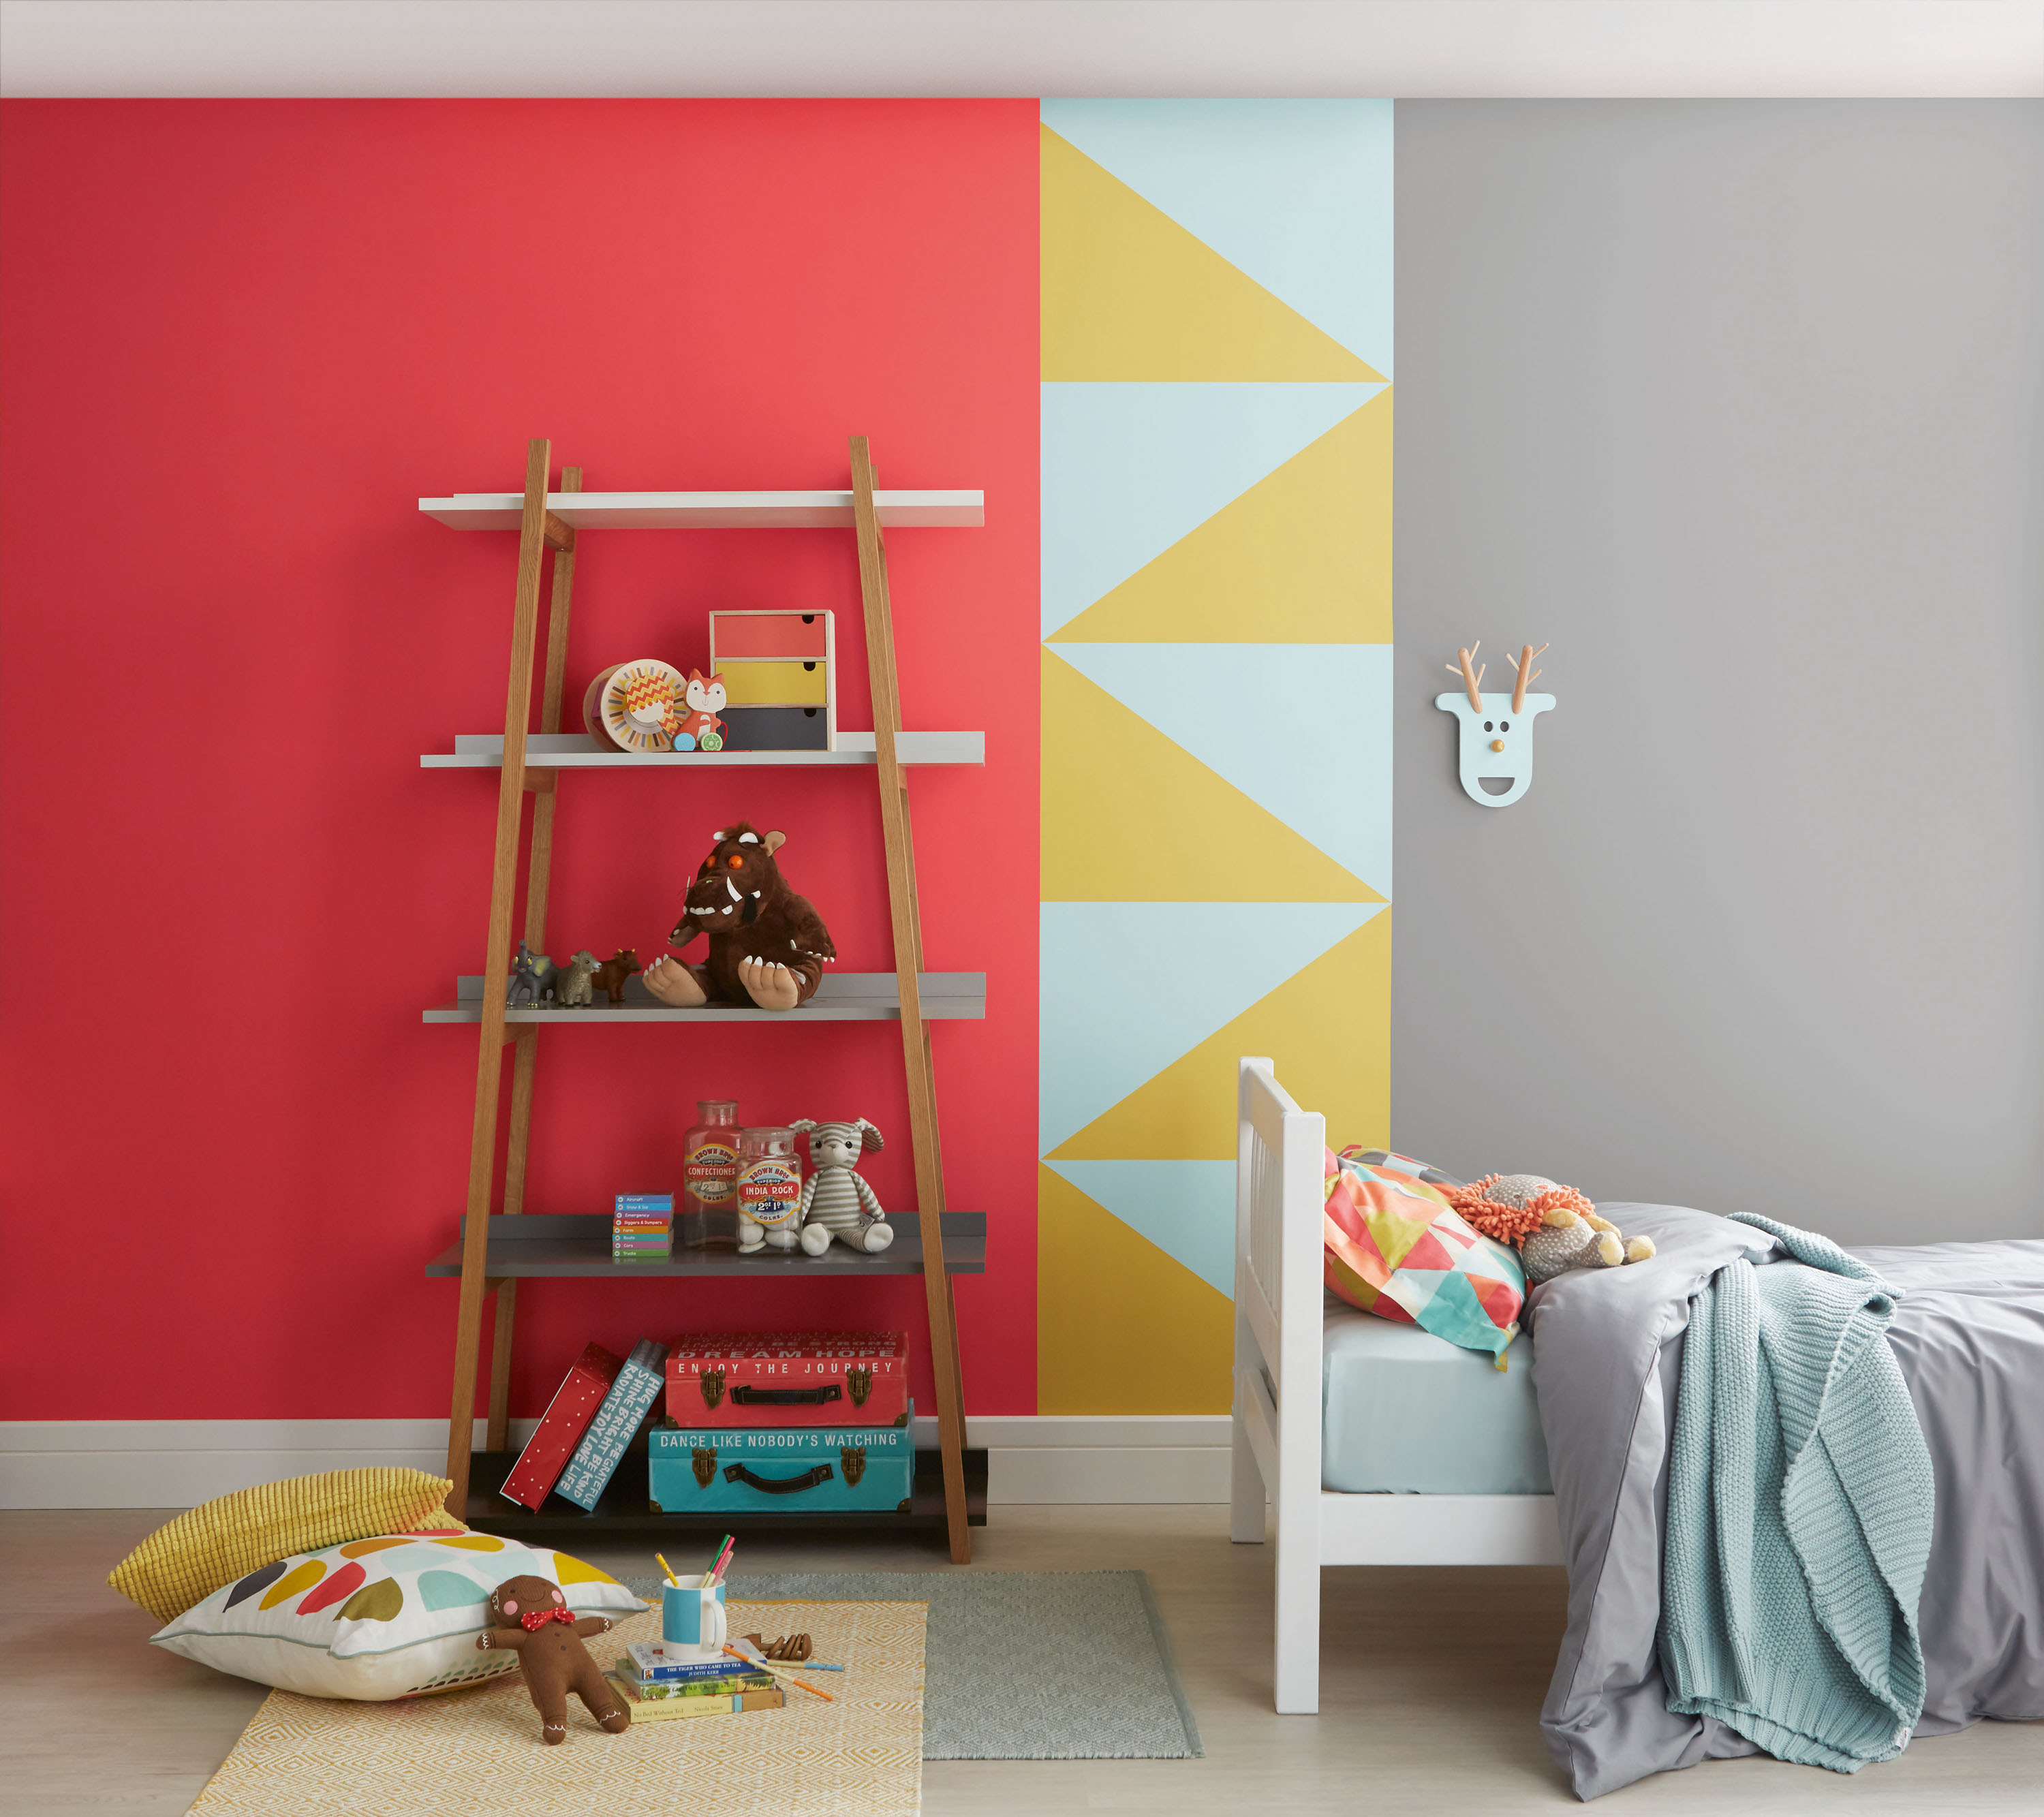 paint colour schemes for kids' bedrooms: 15 bright ideas | real homes